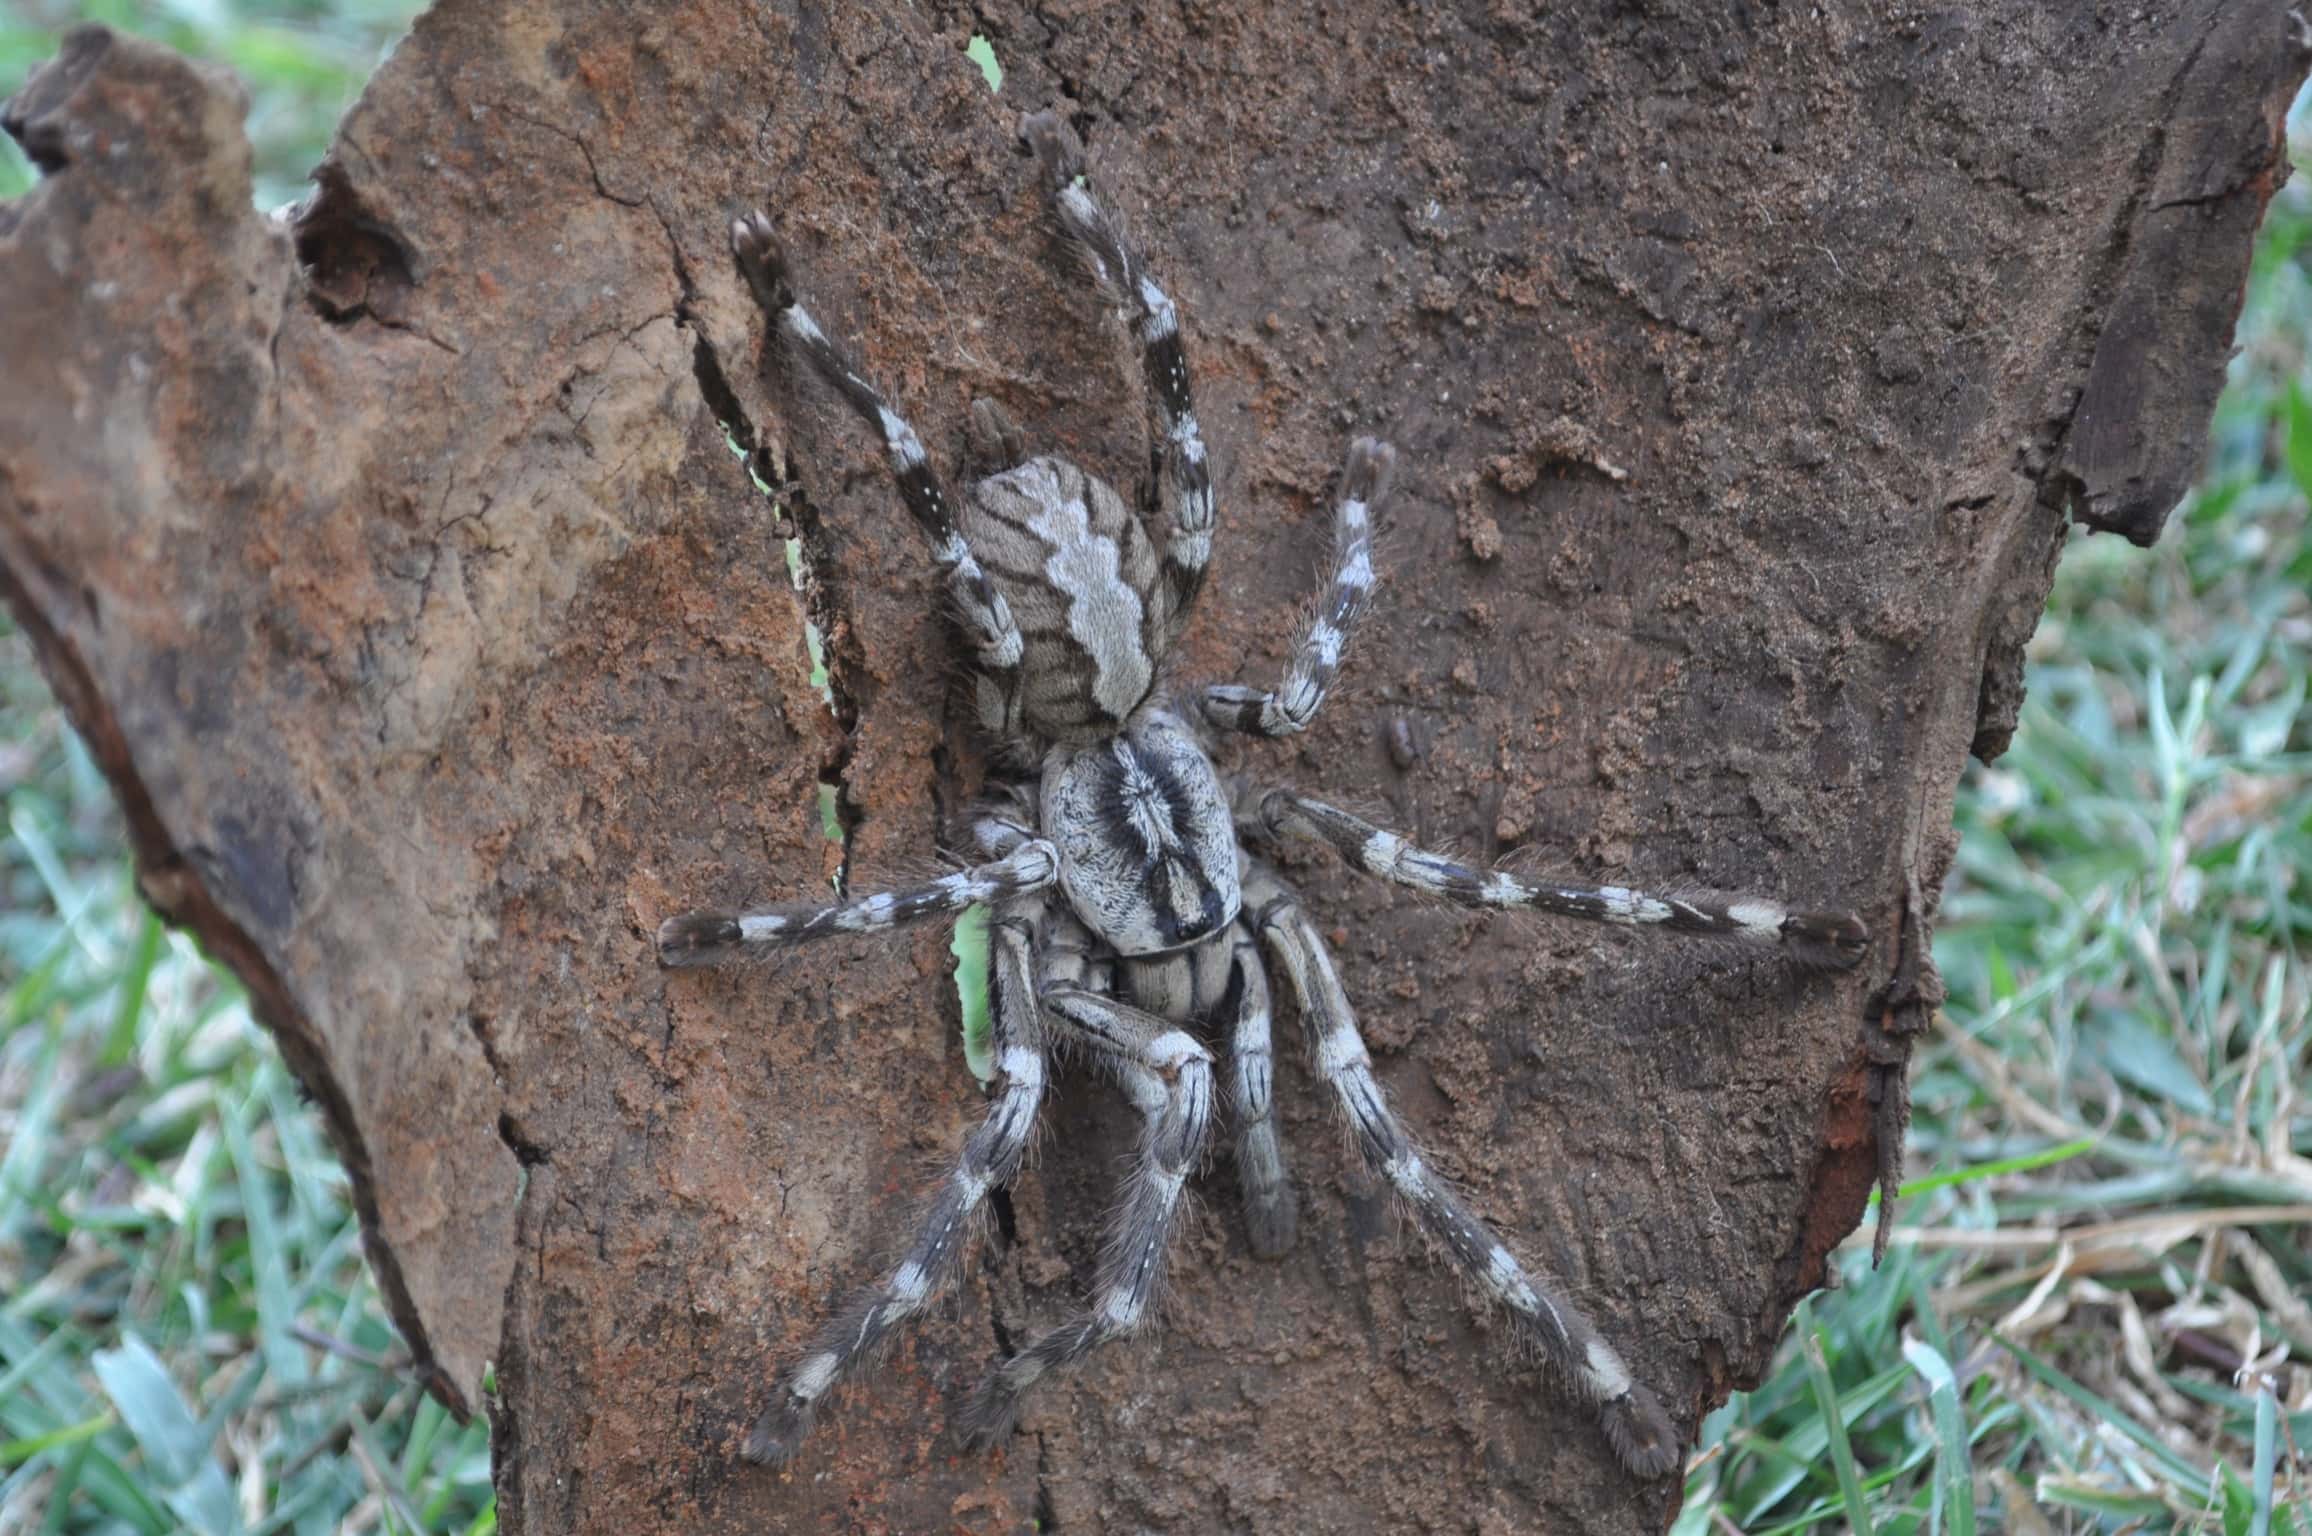 <p>The beautiful Sri Lanka tarantula is sometimes called the "Sri Lanka ornamental tiger spider" and the "face-sized spider." They are endemic to Sri Lanka and grow to have a leg span of 8 inches. </p>